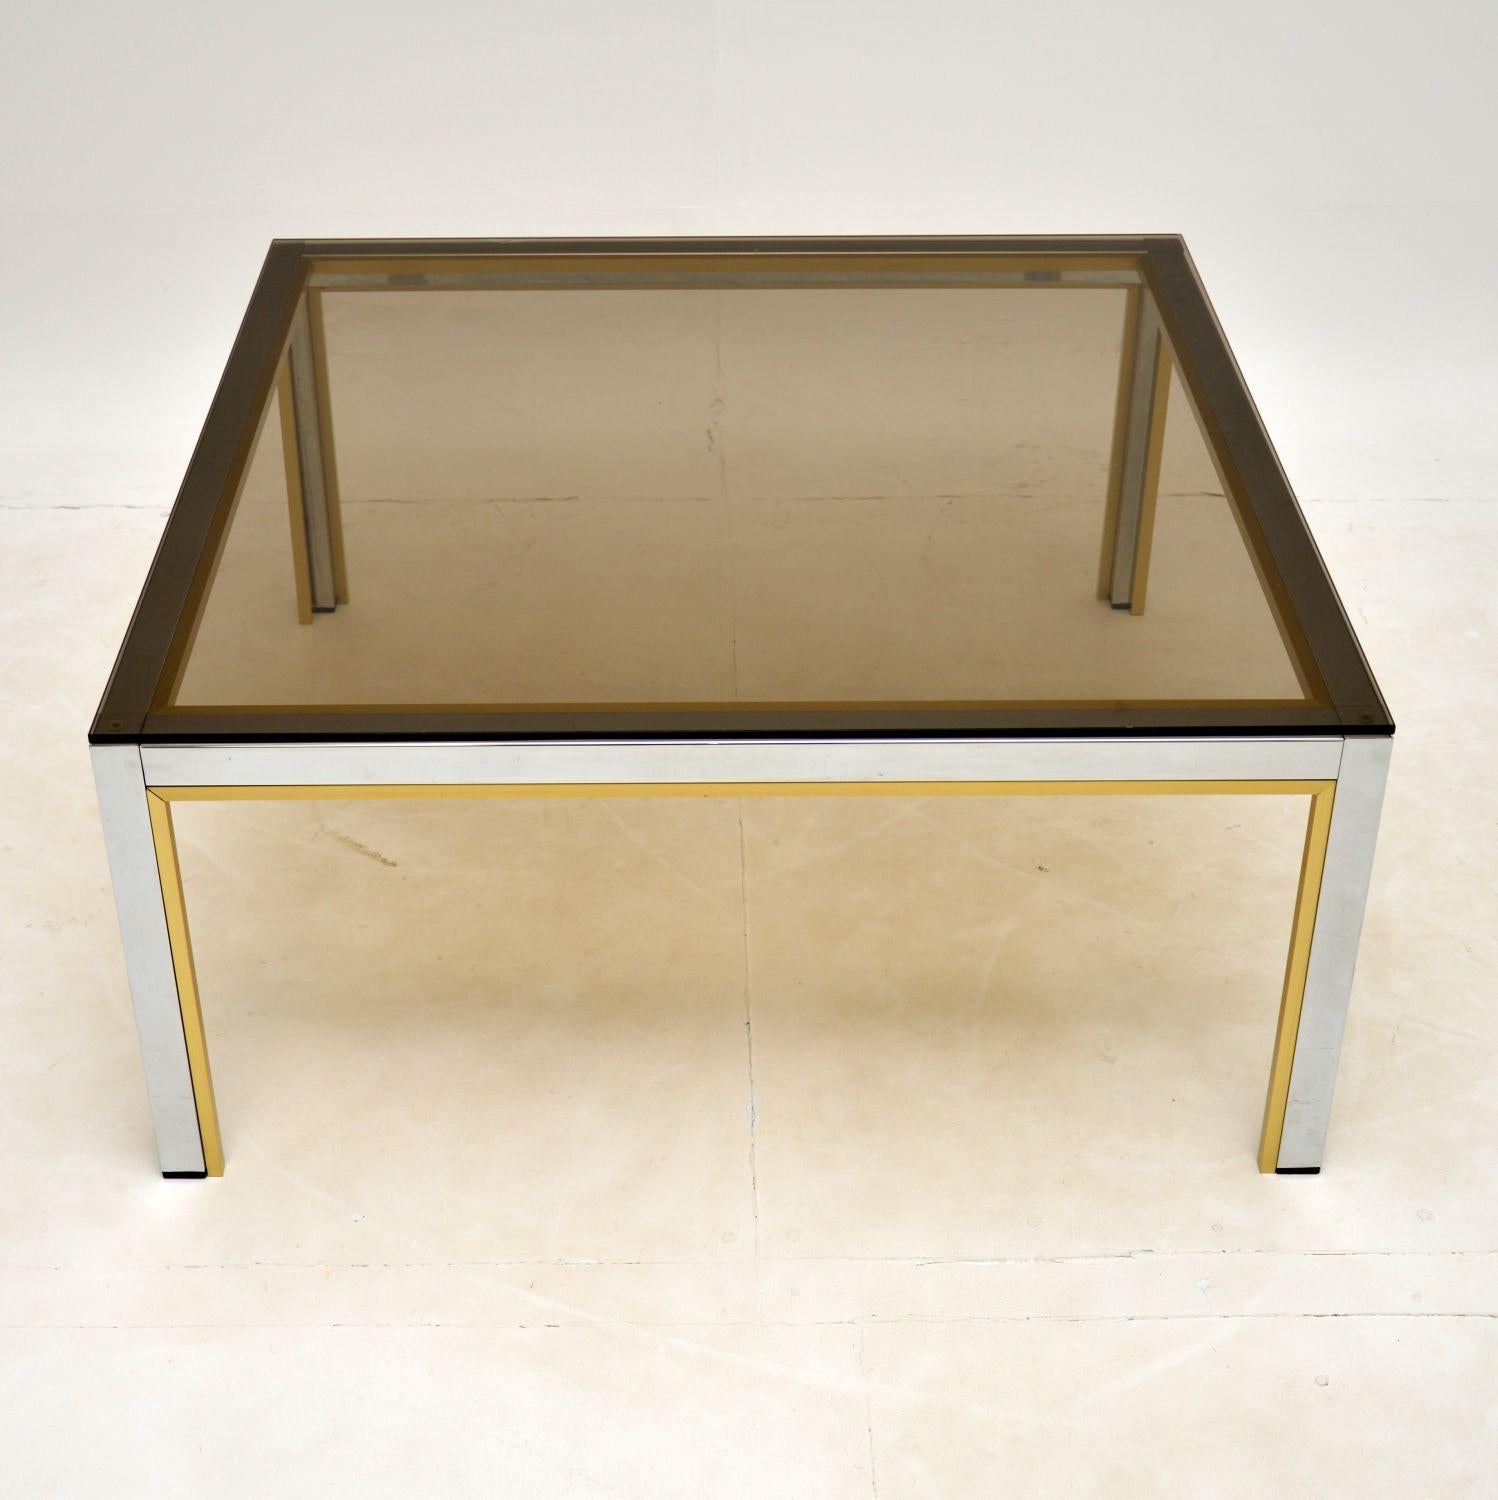 A very stylish vintage coffee table, beautifully made from chrome and brass plated aluminium. This was made in Italy by Zevi, it dates from the 1970’s.

These were originally retailed in Harrods, and they are of excellent quality. This is a very